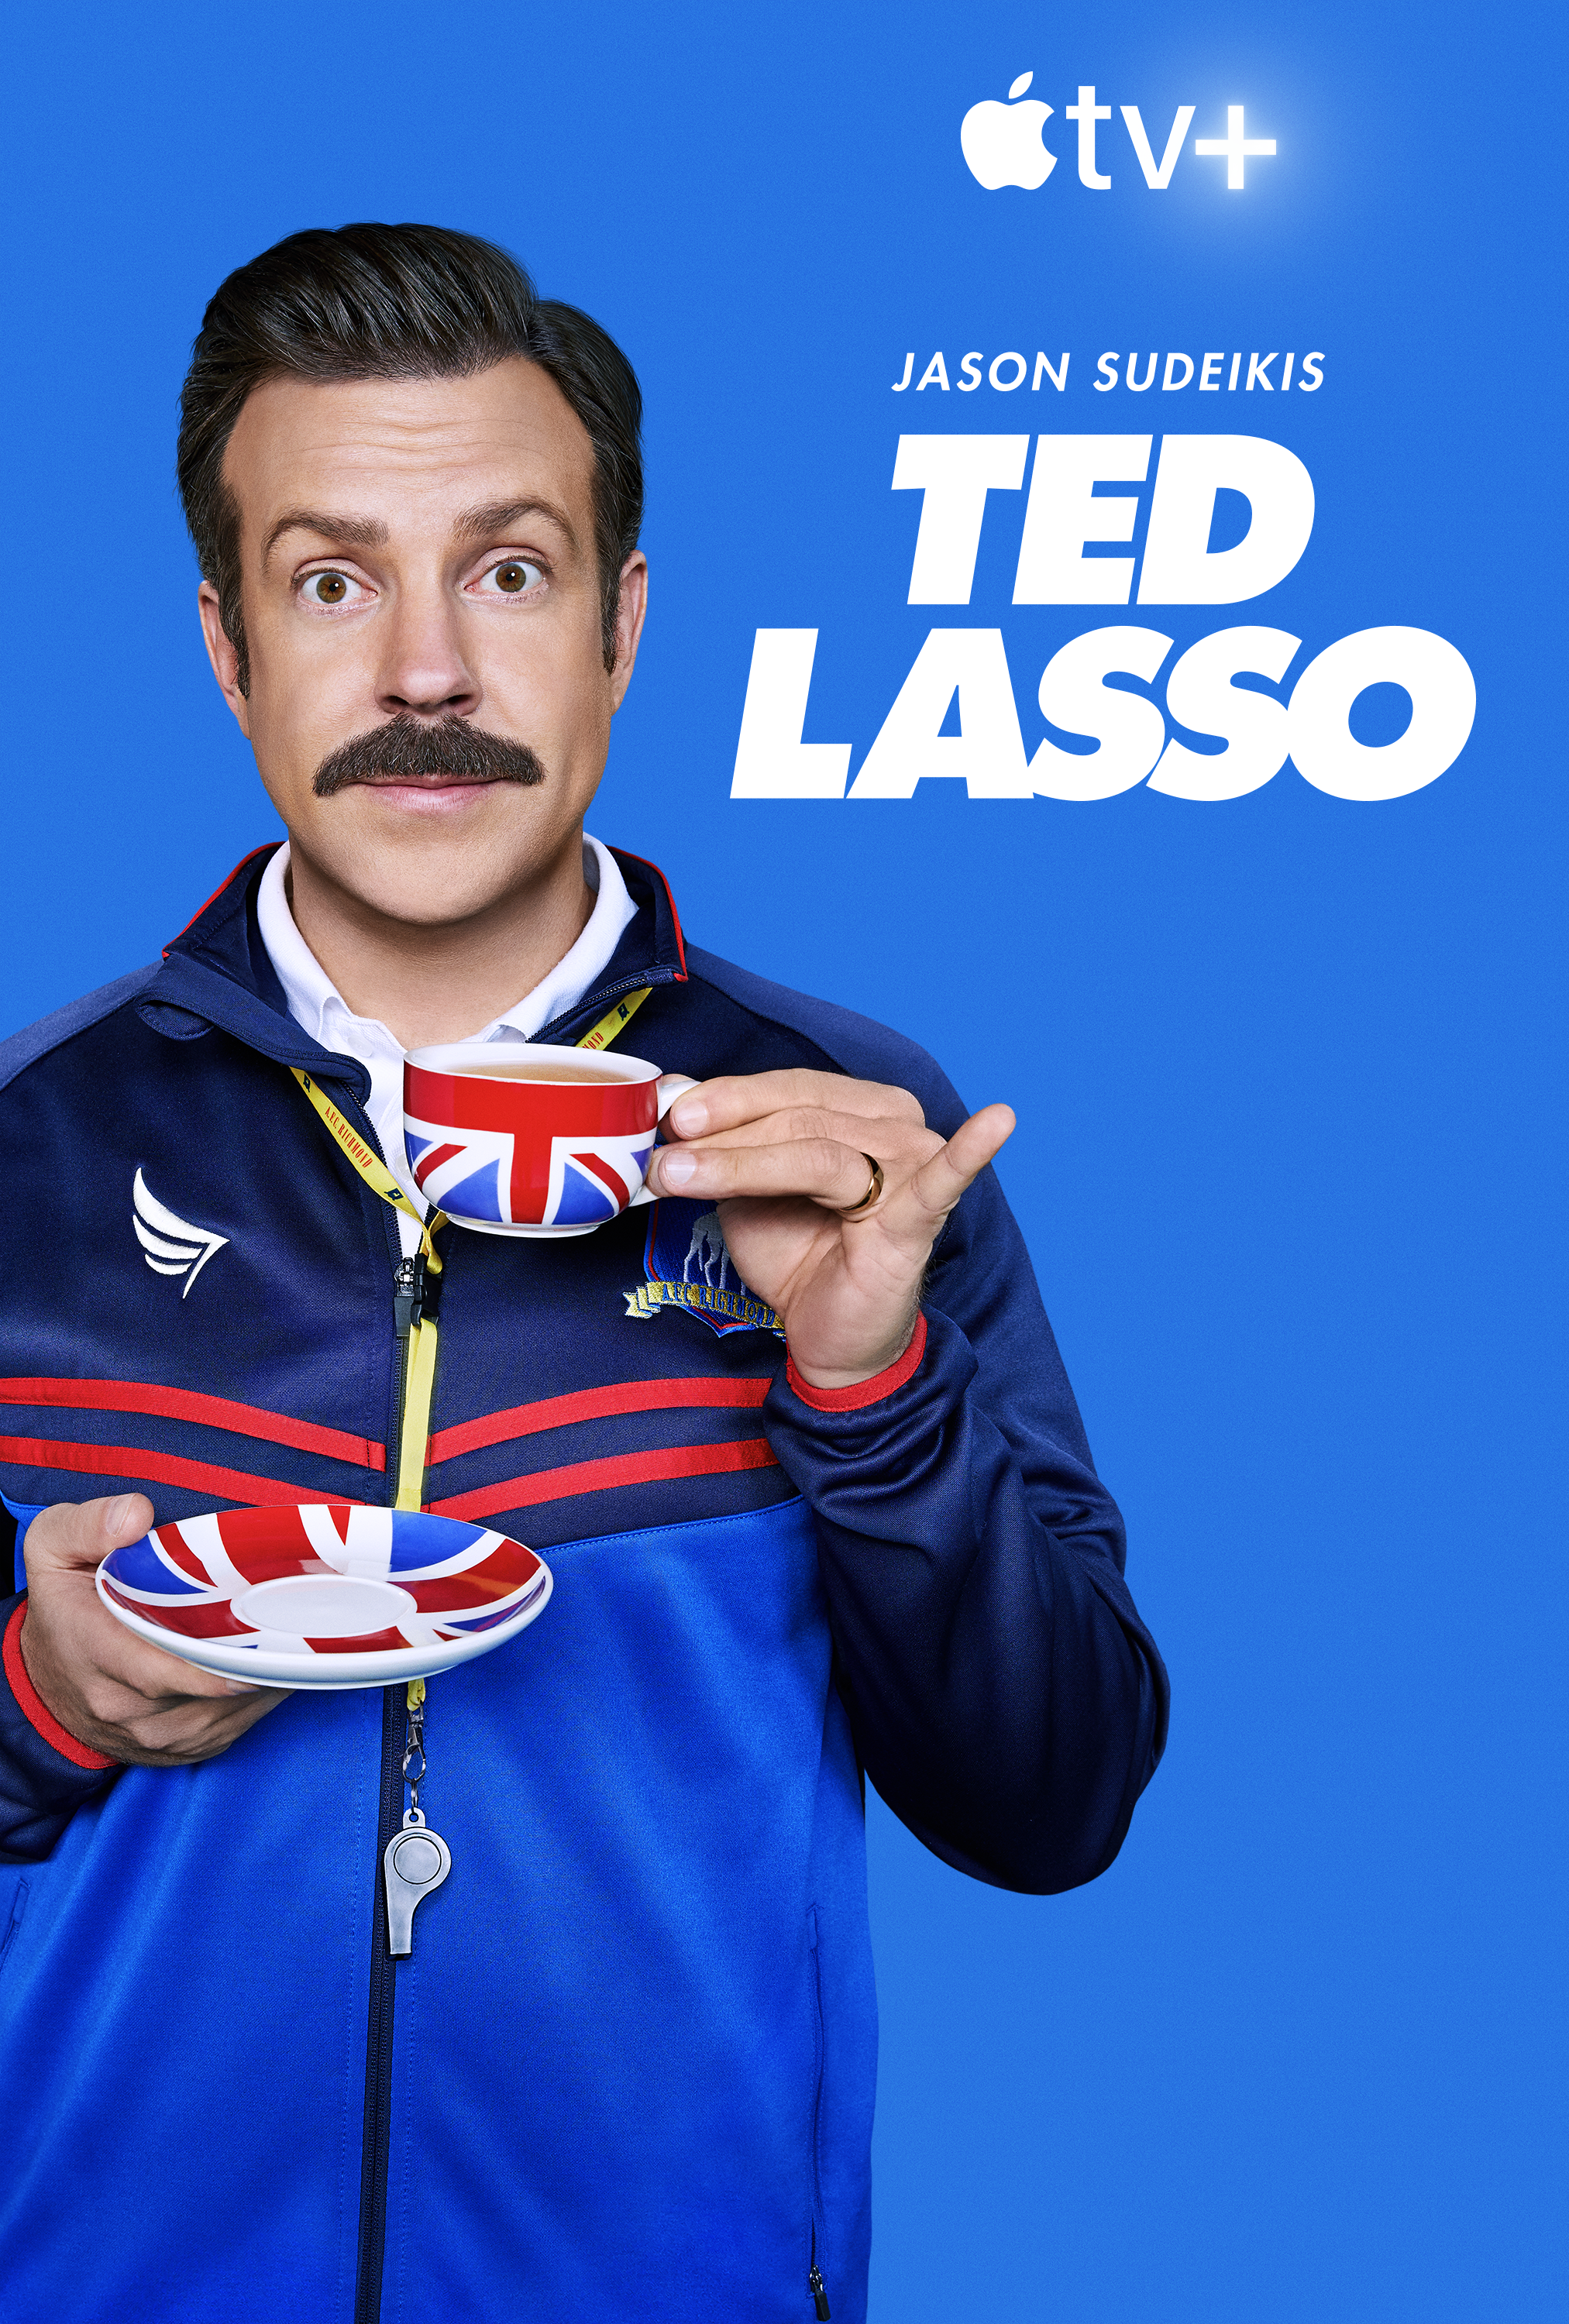 Listener Numbers, Contacts, Similar Podcasts - Jason Sudeikis and